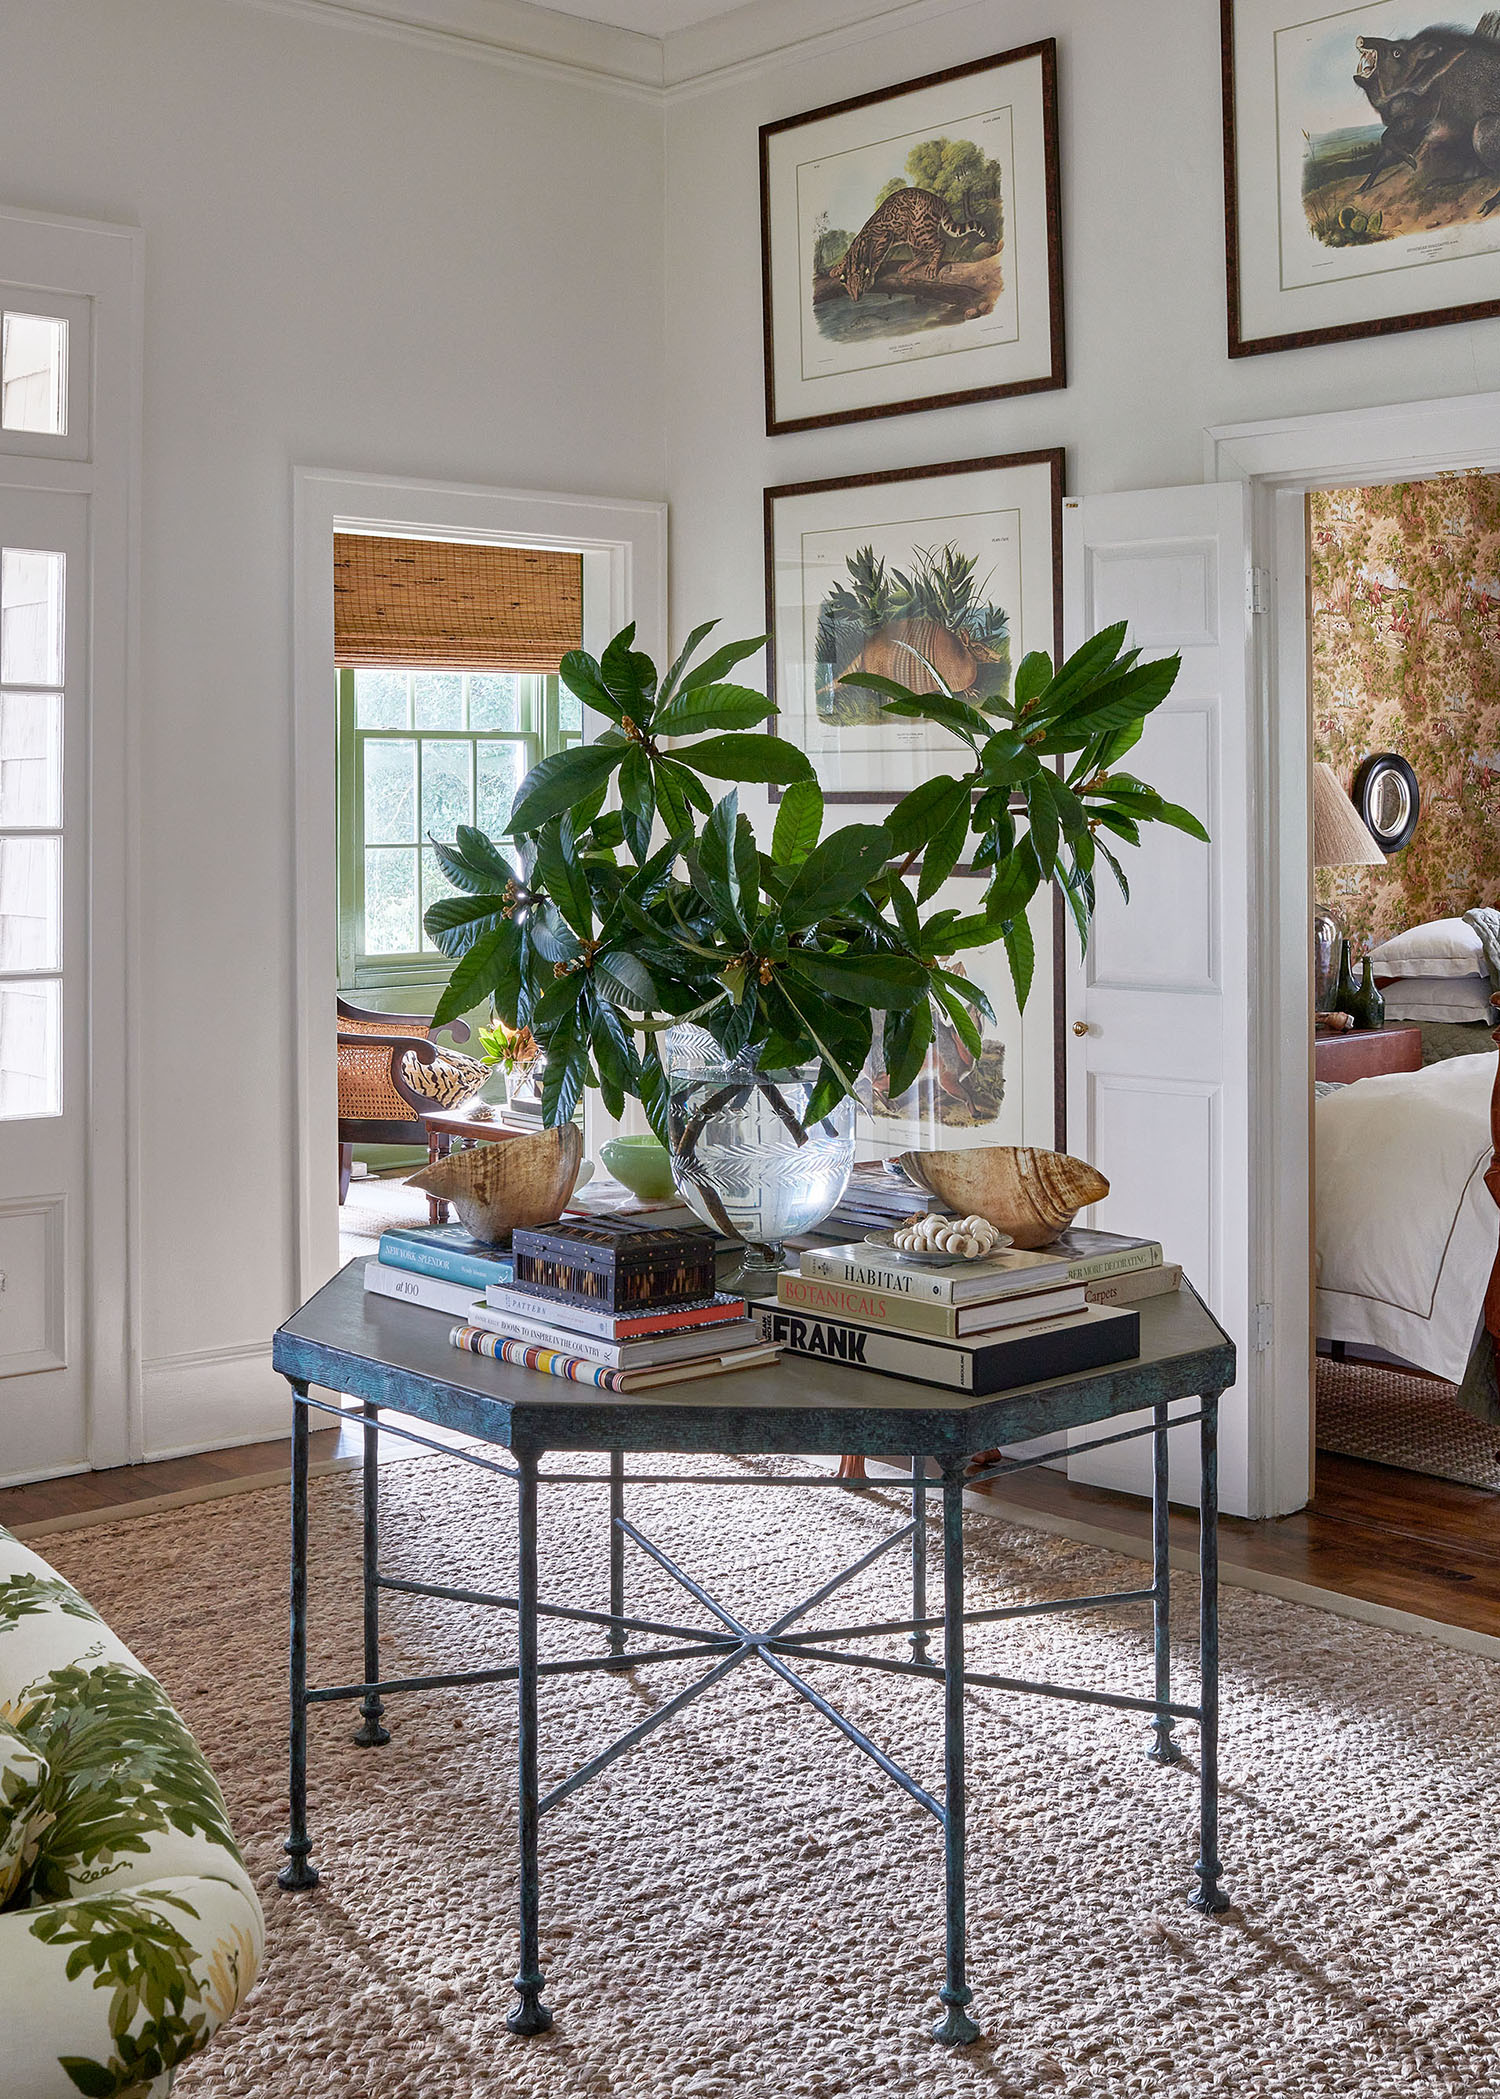 Entryway  in Arkansas Home by Heather Chadduck in Veranda Magazine by Alison Gootee photography